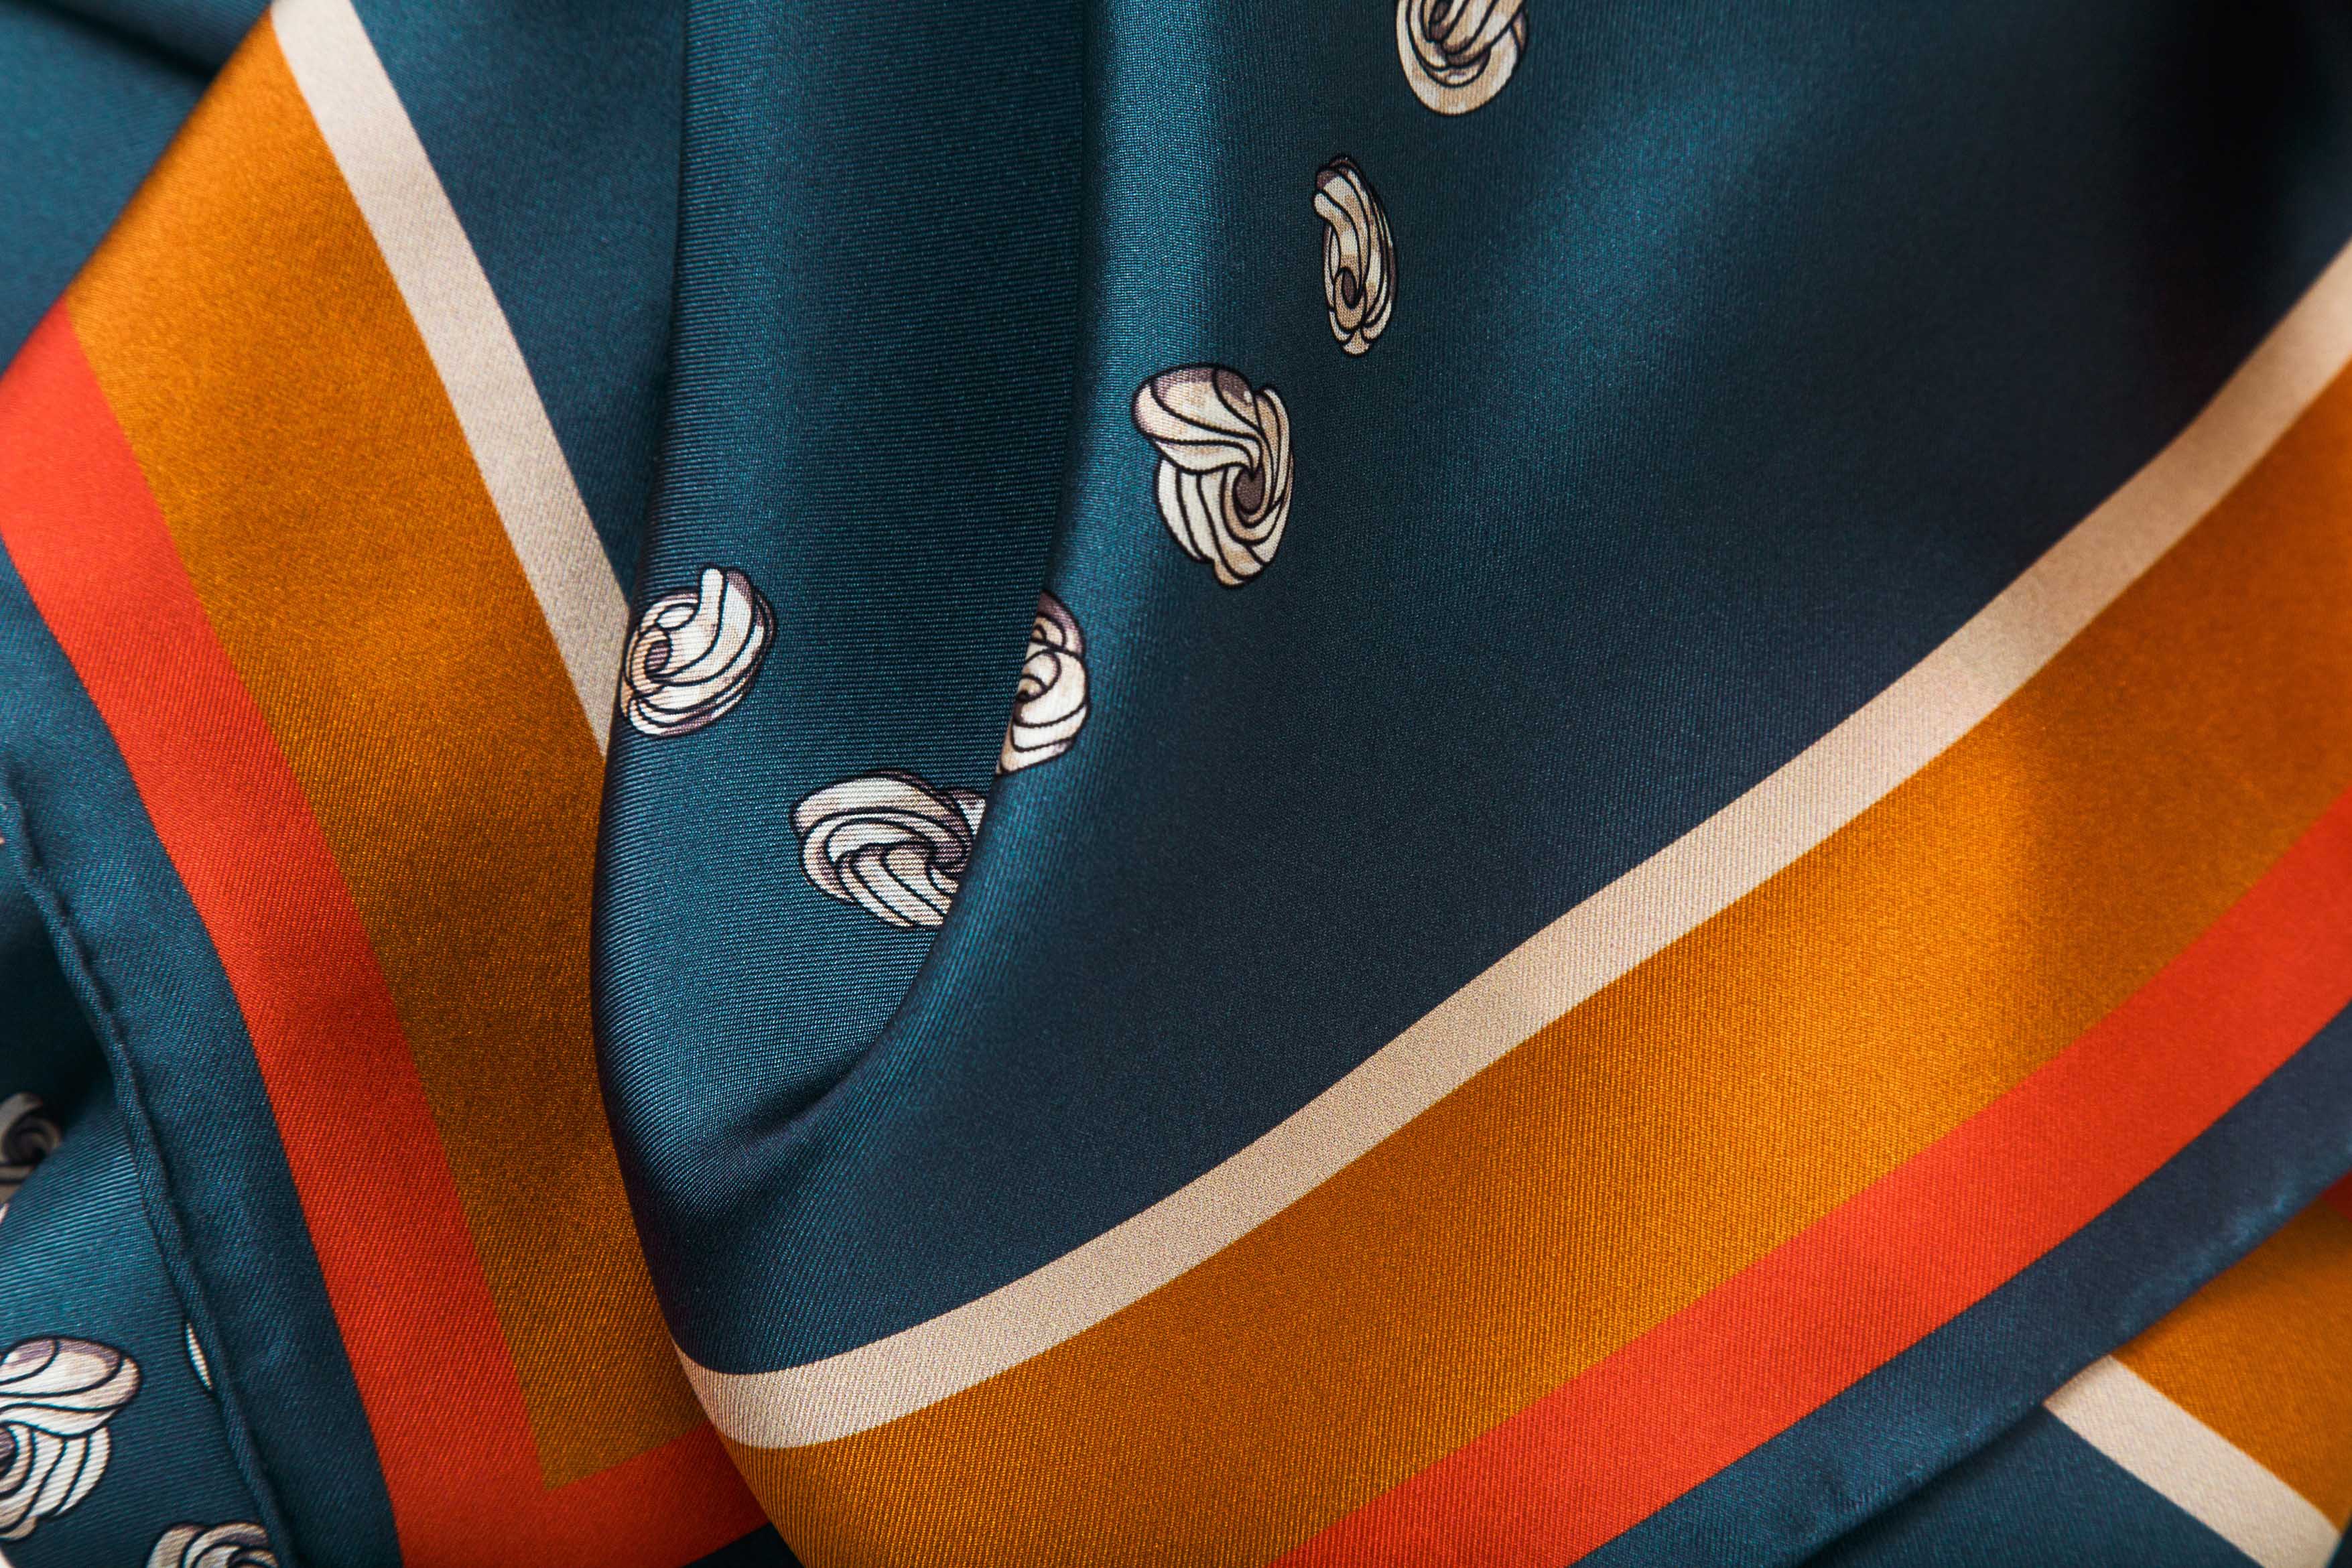 Close-up image of 100% silk square scarf featuring a motif of cream embroidery knots arranged to represent the DESEDA logo on a steely blue background. Features a multi-stripe border in shades of pumpkin, cream, and coral. Illustrates the lightly ridged texture of the silk twill along with the rich color tones and luminous nature of the silk scarf.